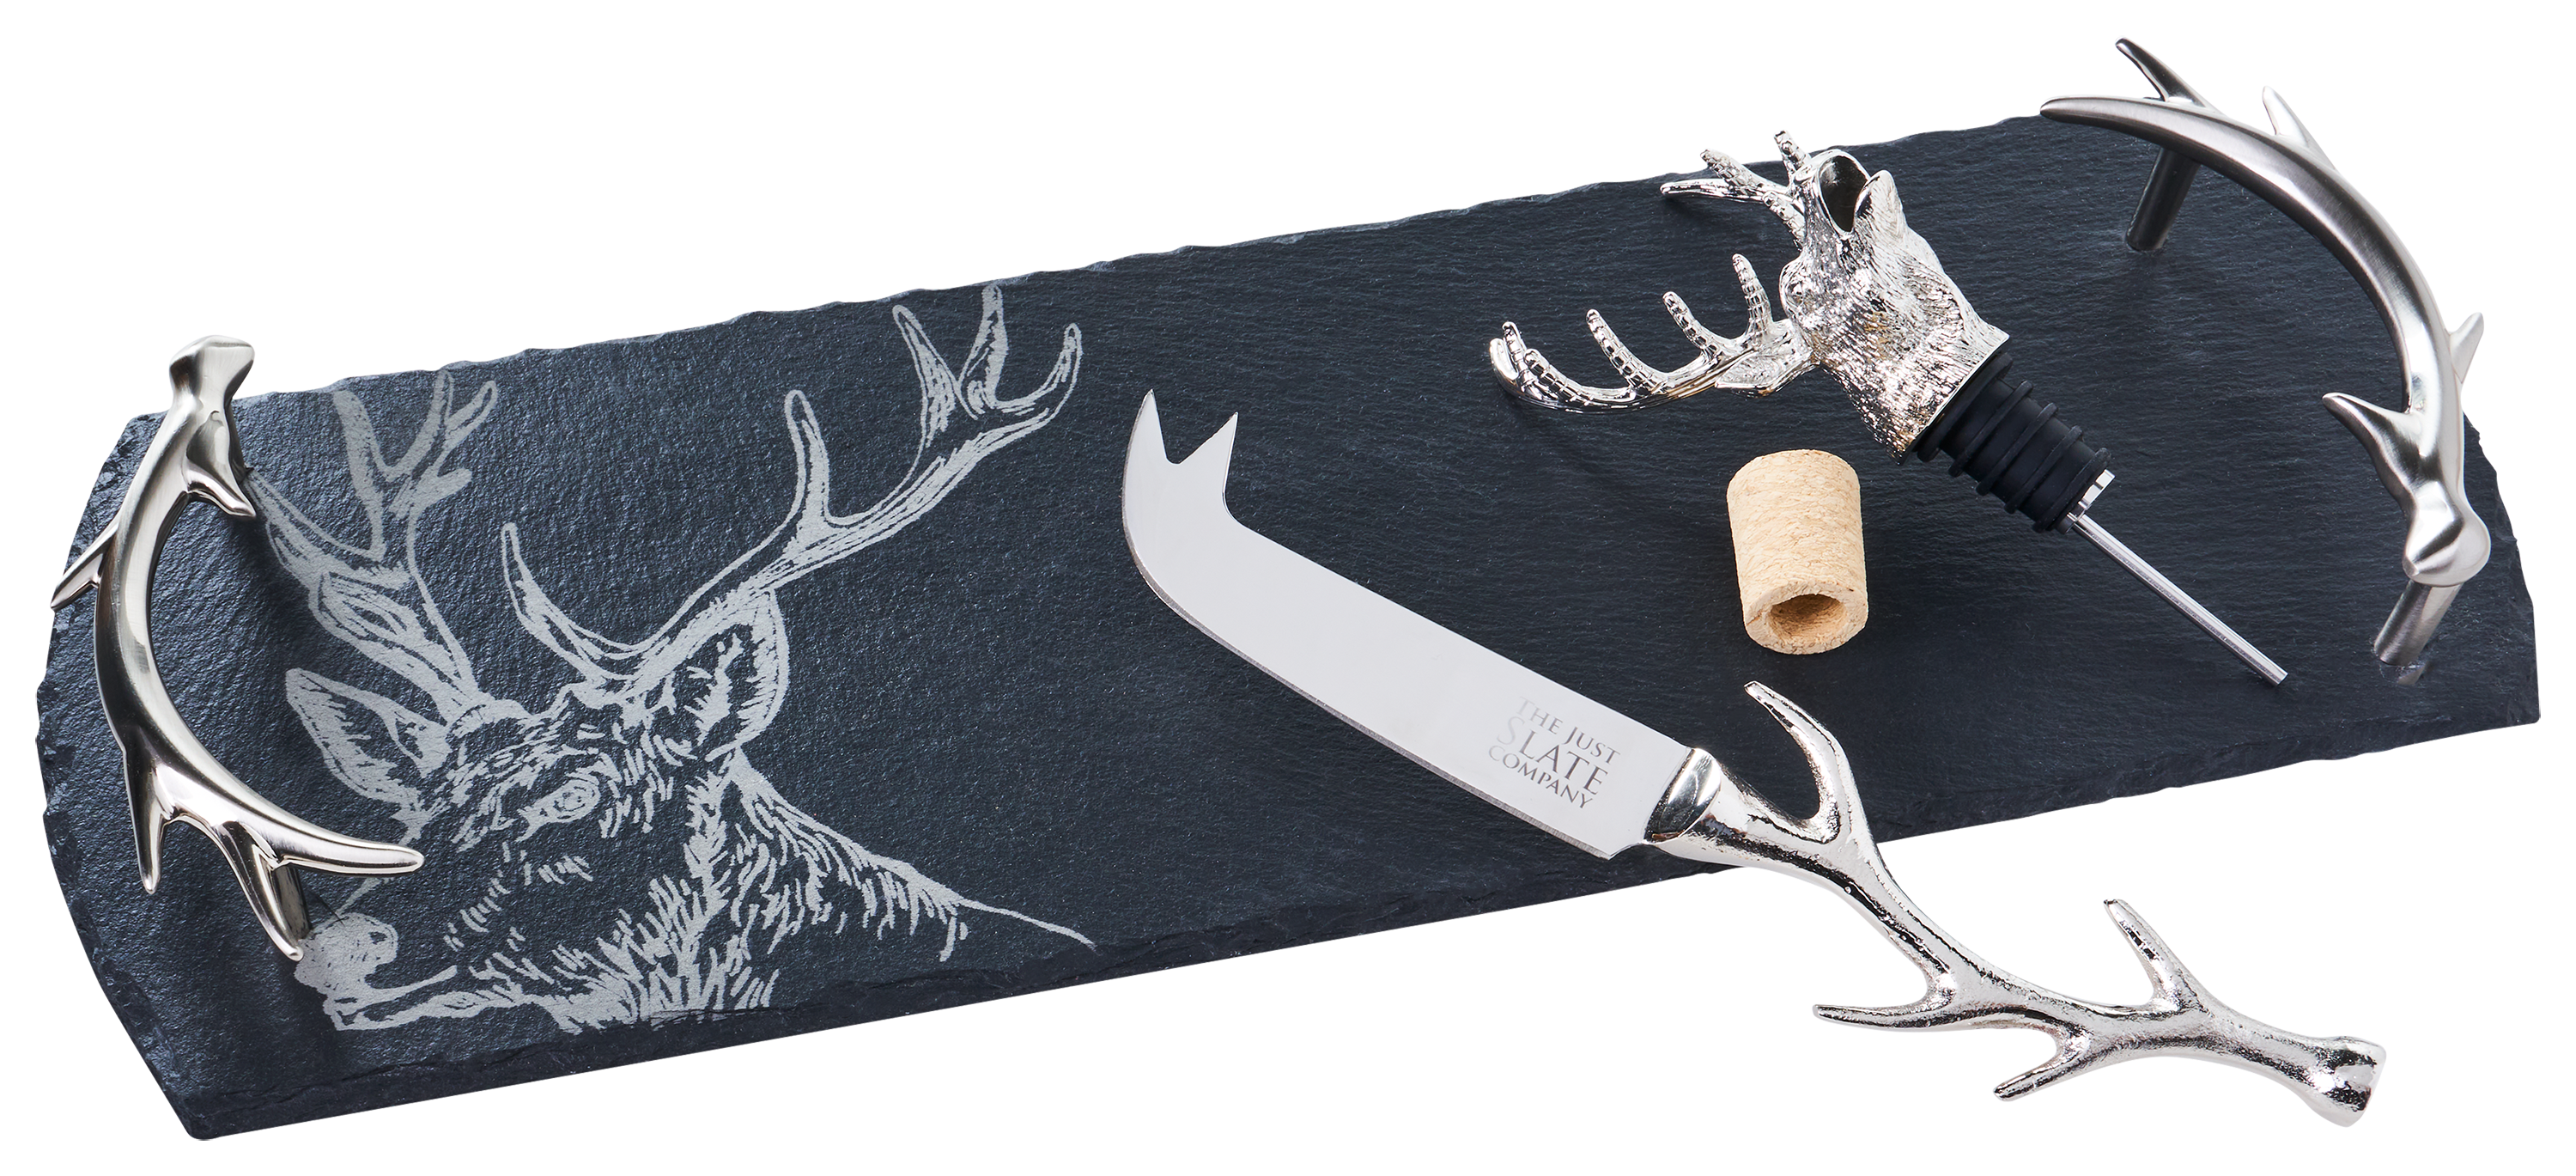 Selbrae House Stag Slate Tray, Cheese Knife, and Bottle Pourer Set